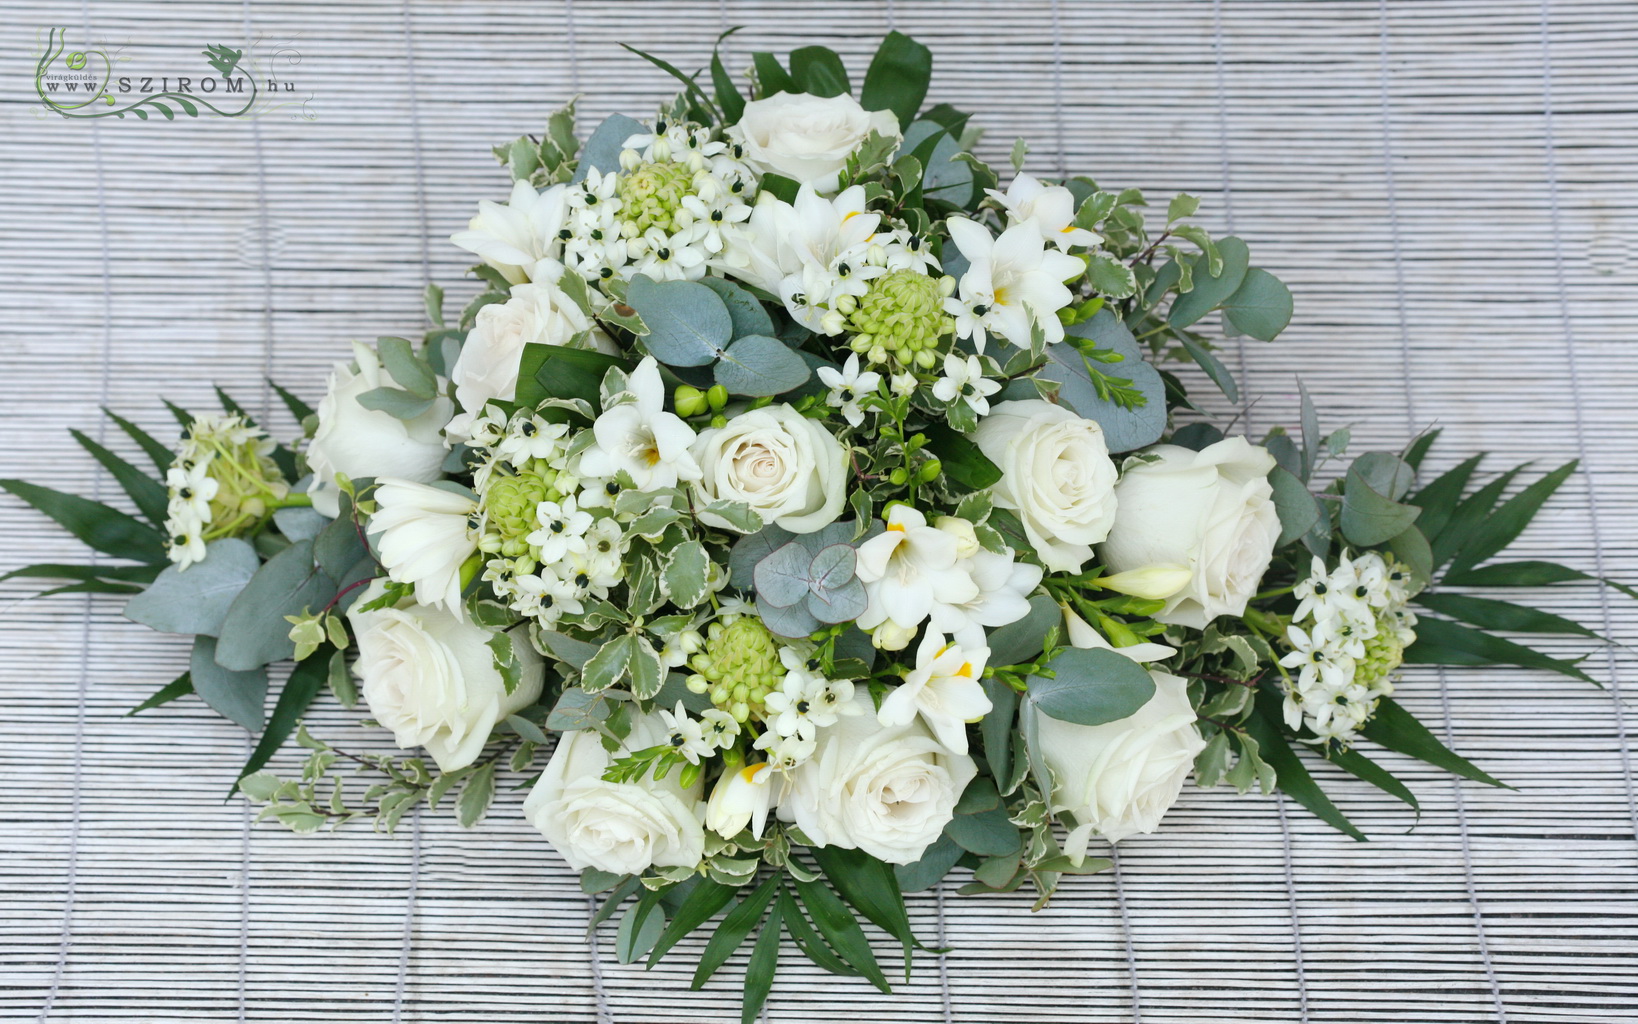 flower delivery Budapest - oval car flower arrangement with roses, ornithogalums, freesias